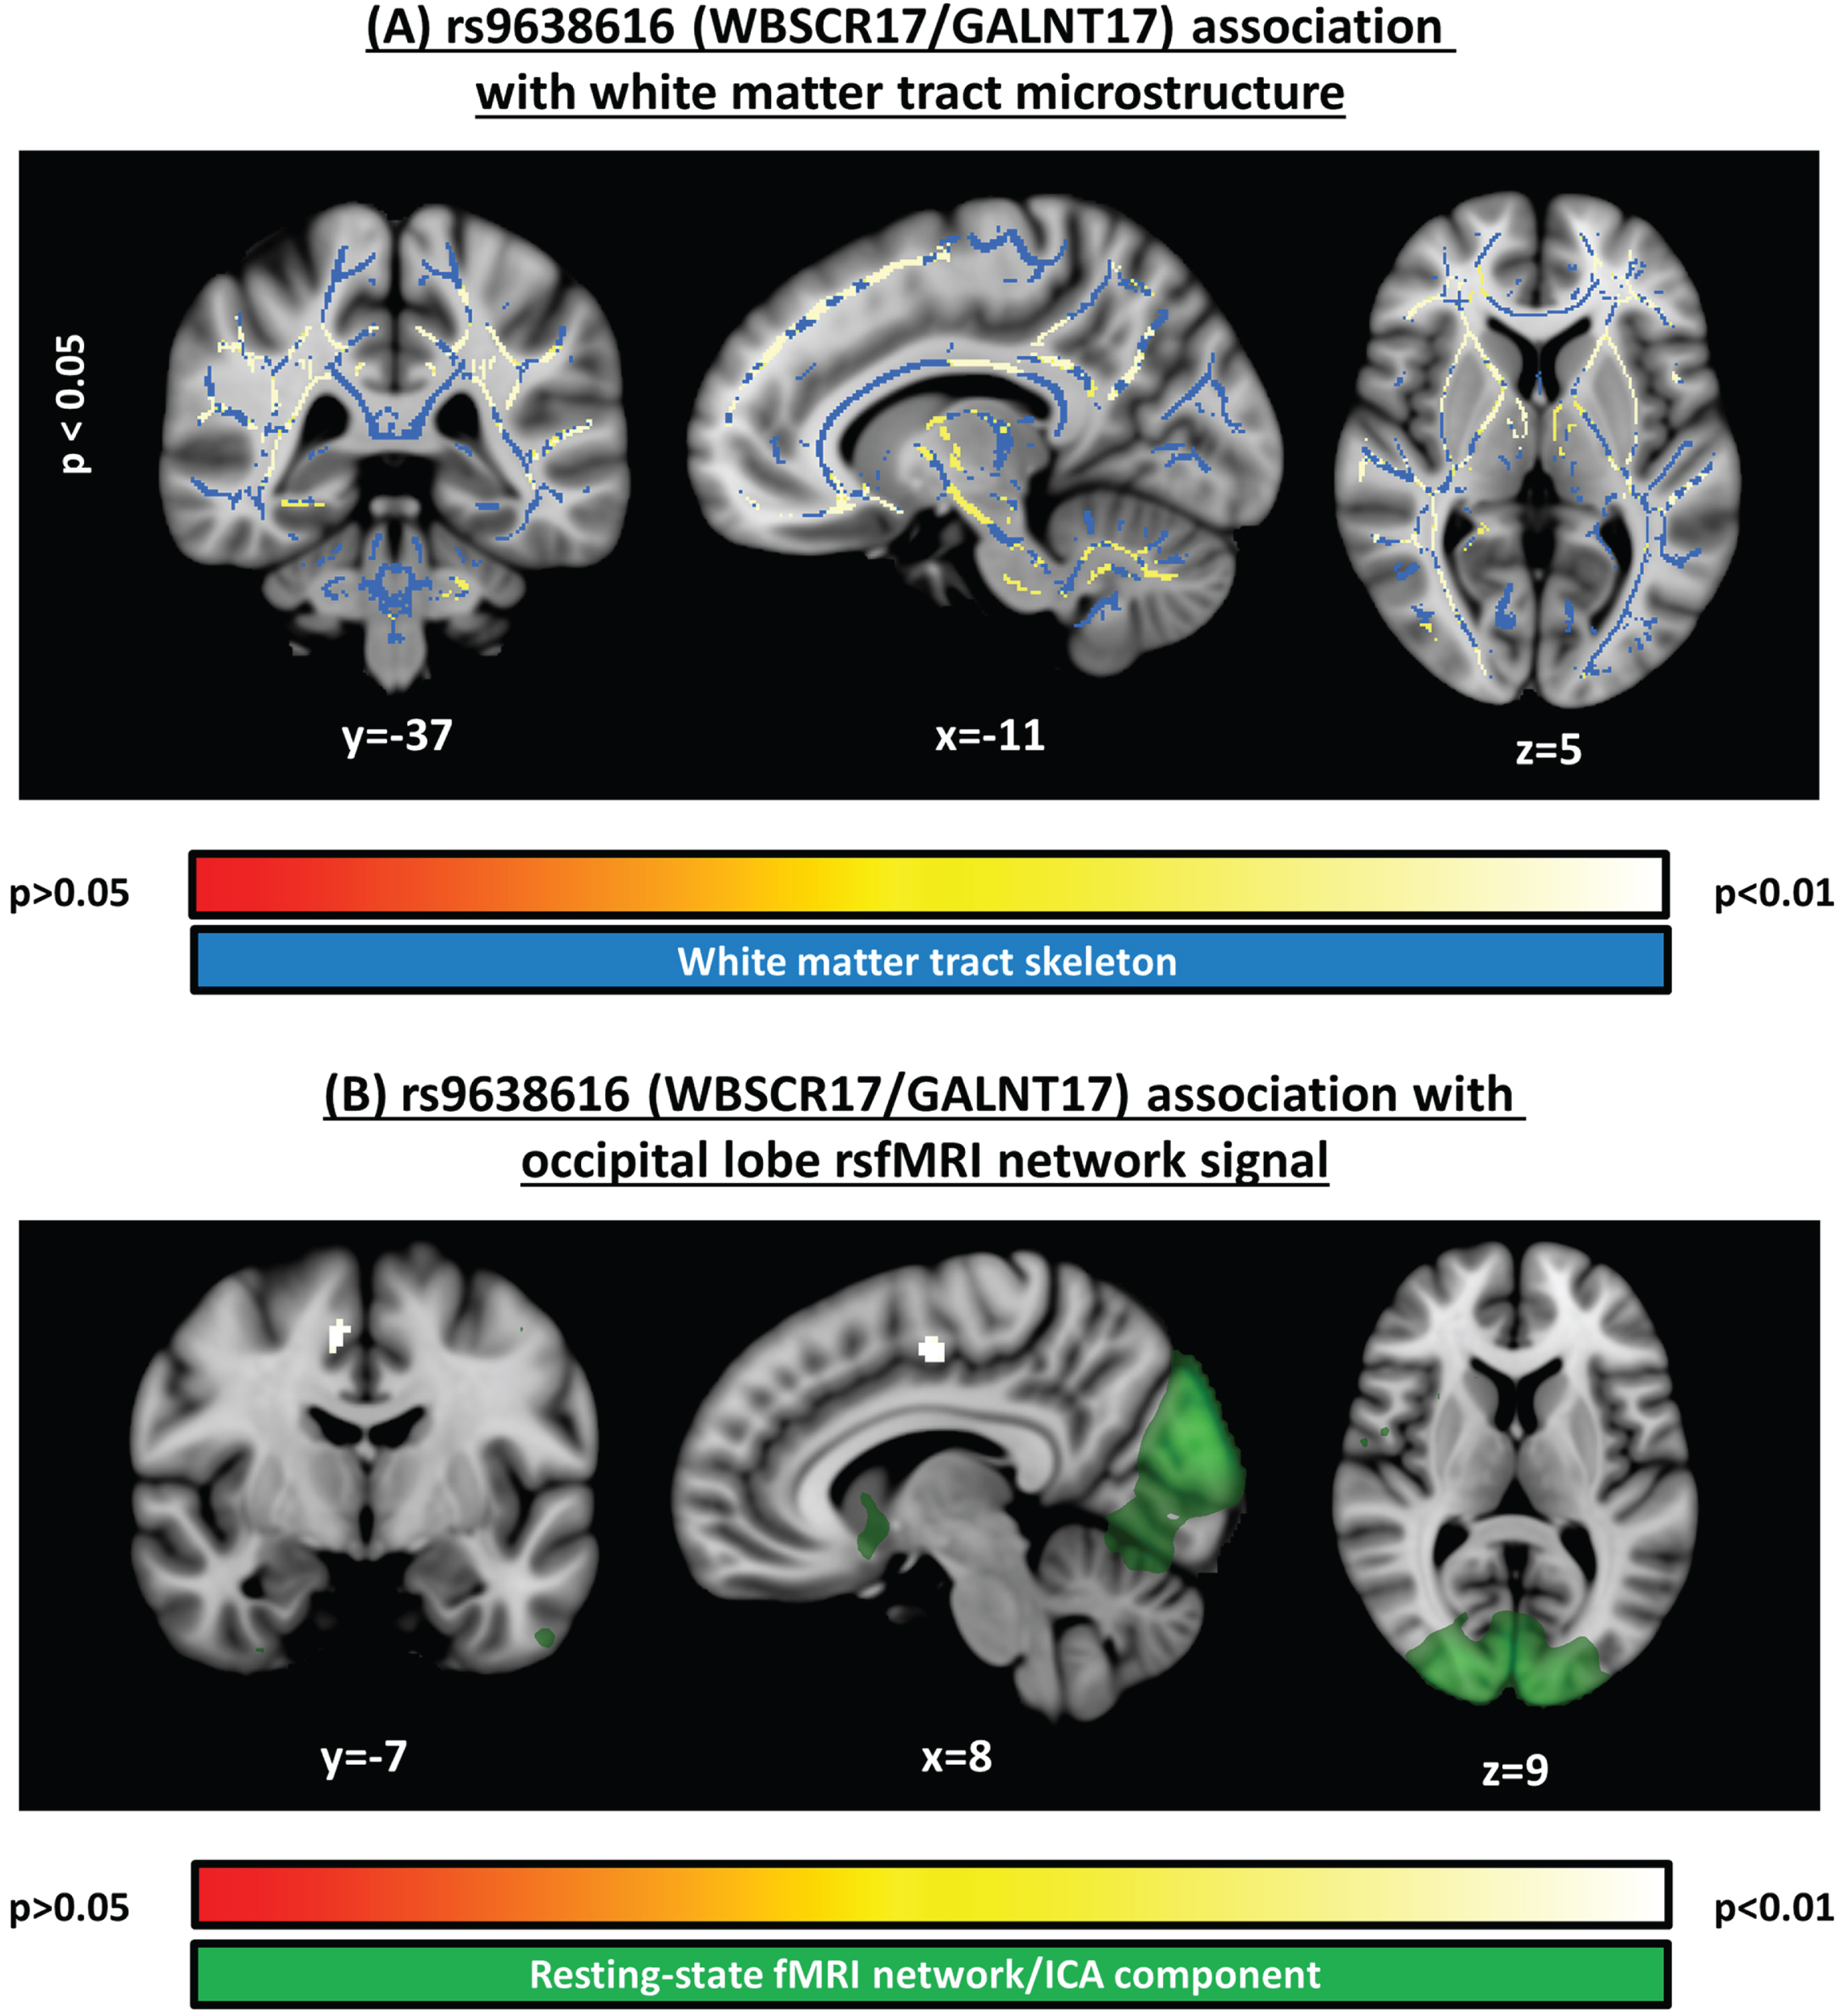 Significant clusters identified in voxelwise analyses. A) Structural MRI voxelwise analysis of white matter microstructure (fractional anisotropy), testing the association to rs9638616, corrected for multiple comparisons across voxels. B) Resting-state functional MRI voxelwise analysis, testing the association to rs9638616, corrected for multiple comparisons across voxels and independent components. Position of each slice is given in MNI152 coordinates. All images are shown with the radiological right-left convention.